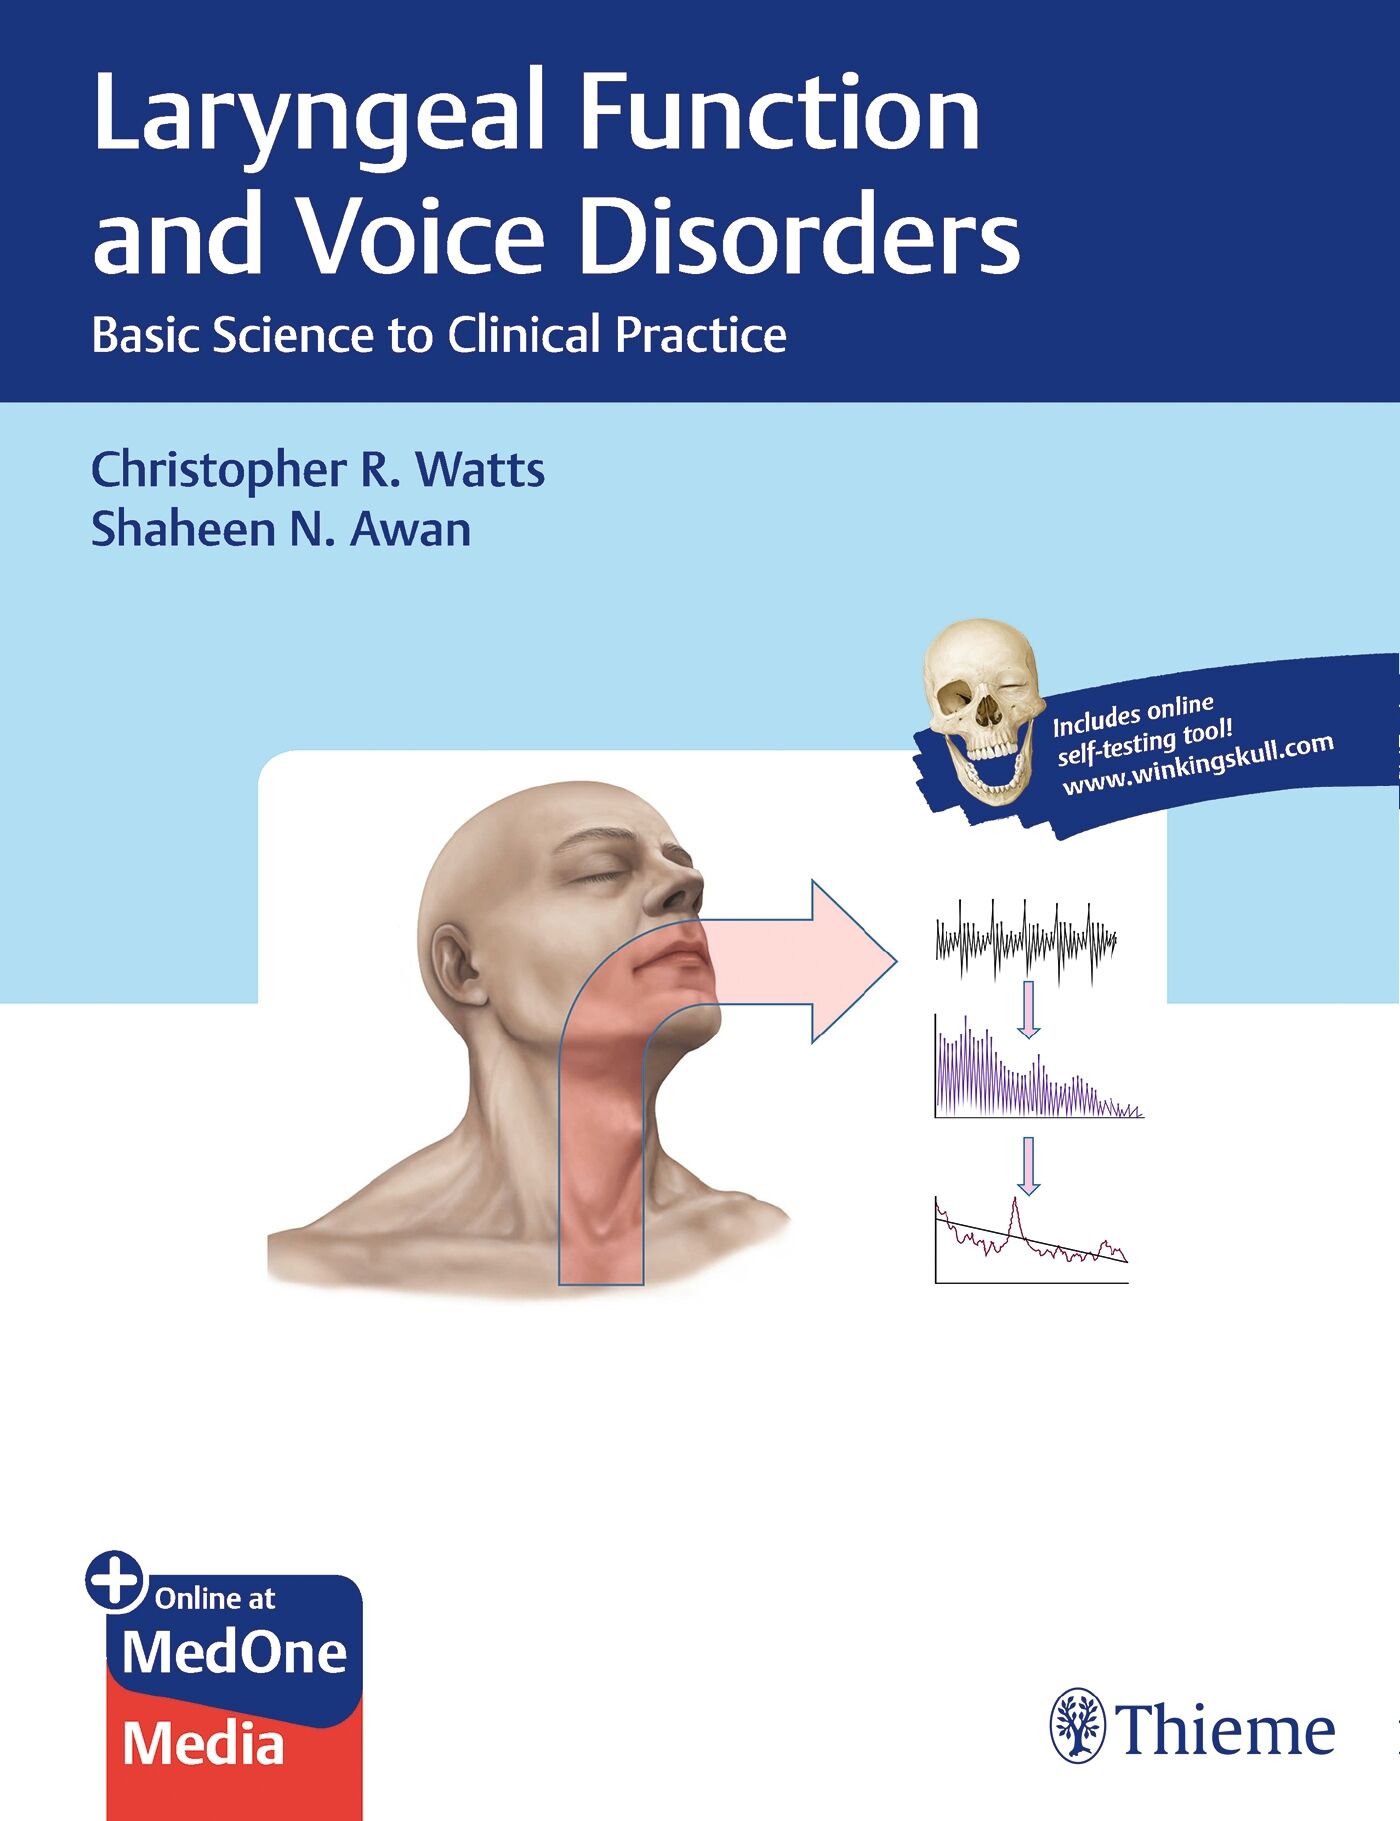 Laryngeal Function and Voice Disorders, 9781626233911